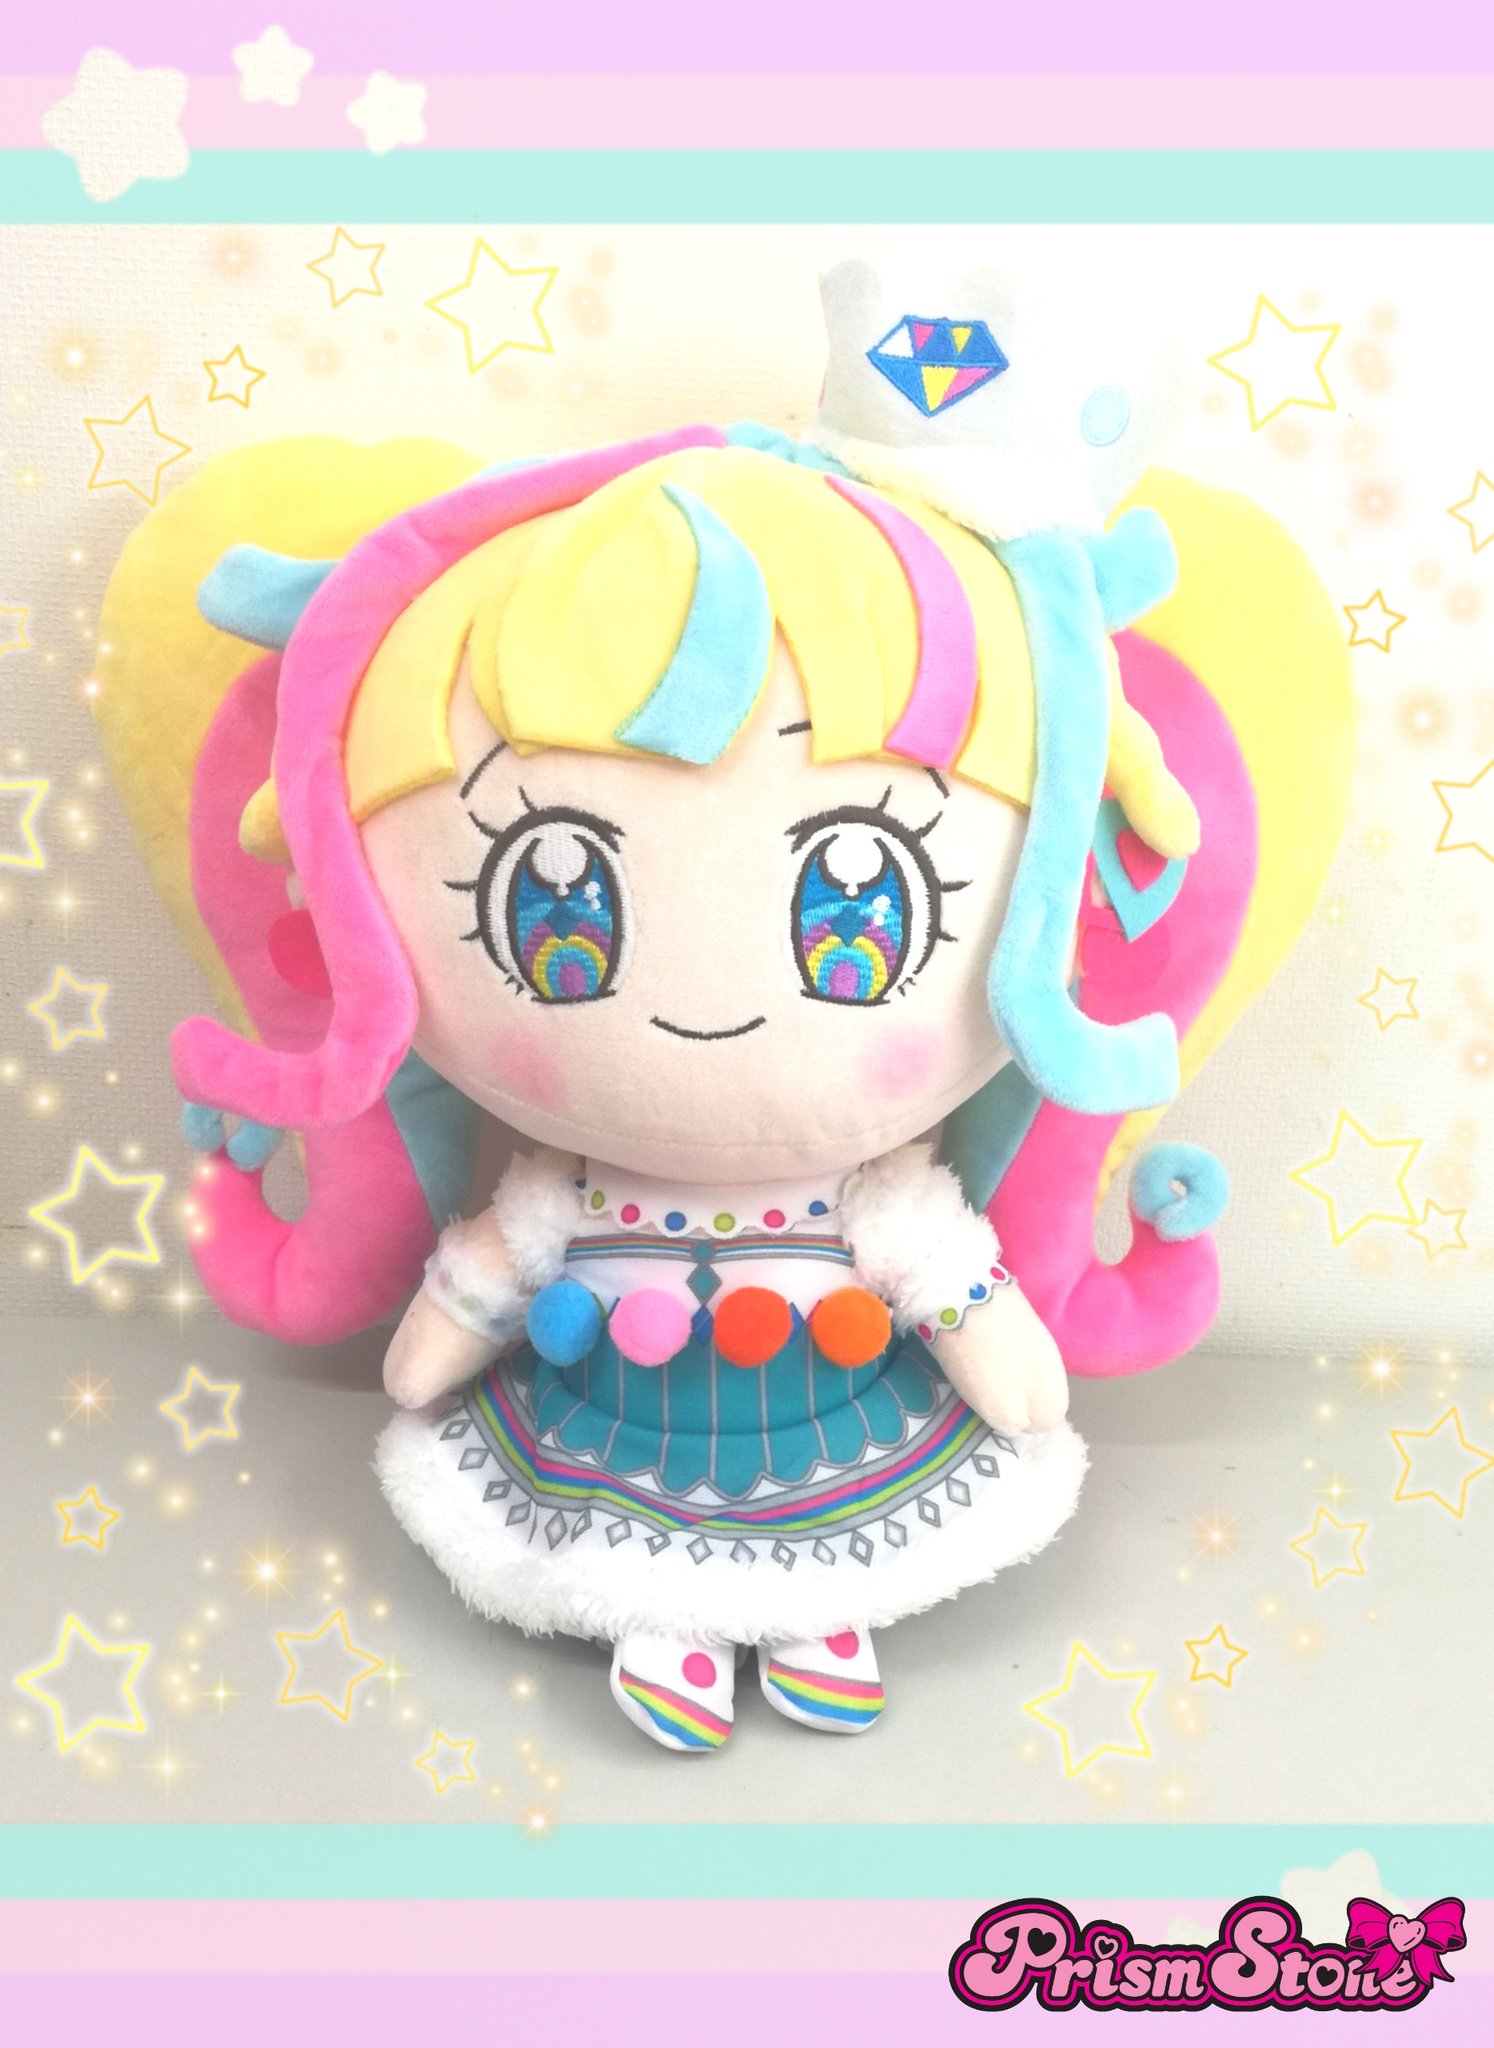 This is an offer made on the Request: Kiratto PriChan Dress-Up 